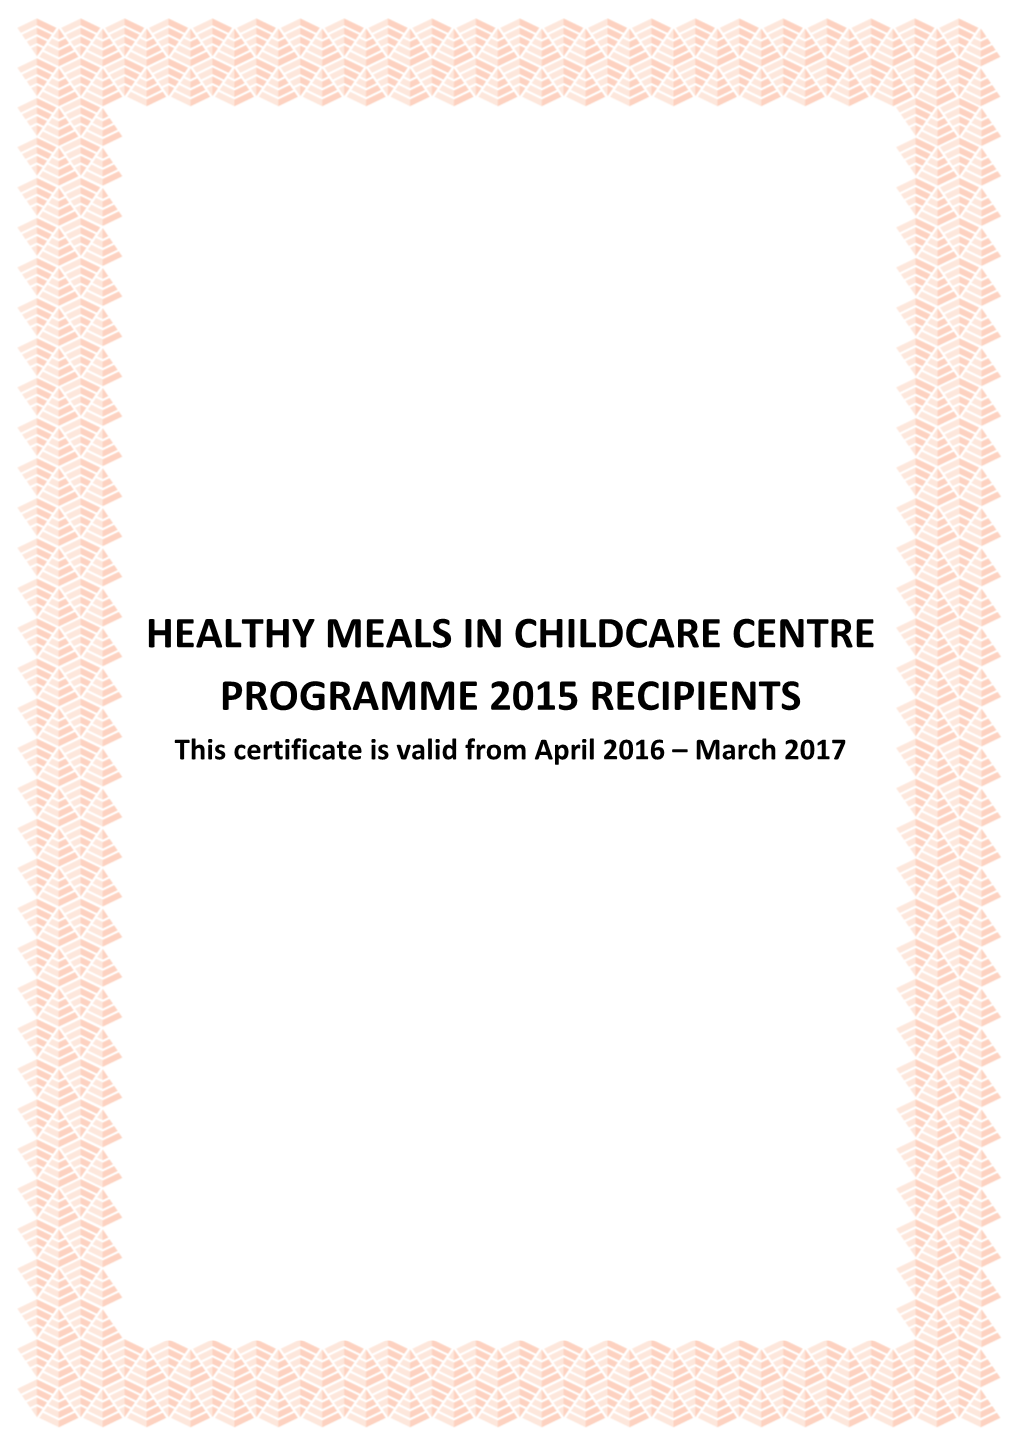 HEALTHY MEALS in CHILDCARE CENTRE PROGRAMME 2015 RECIPIENTS This Certificate Is Valid from April 2016 – March 2017